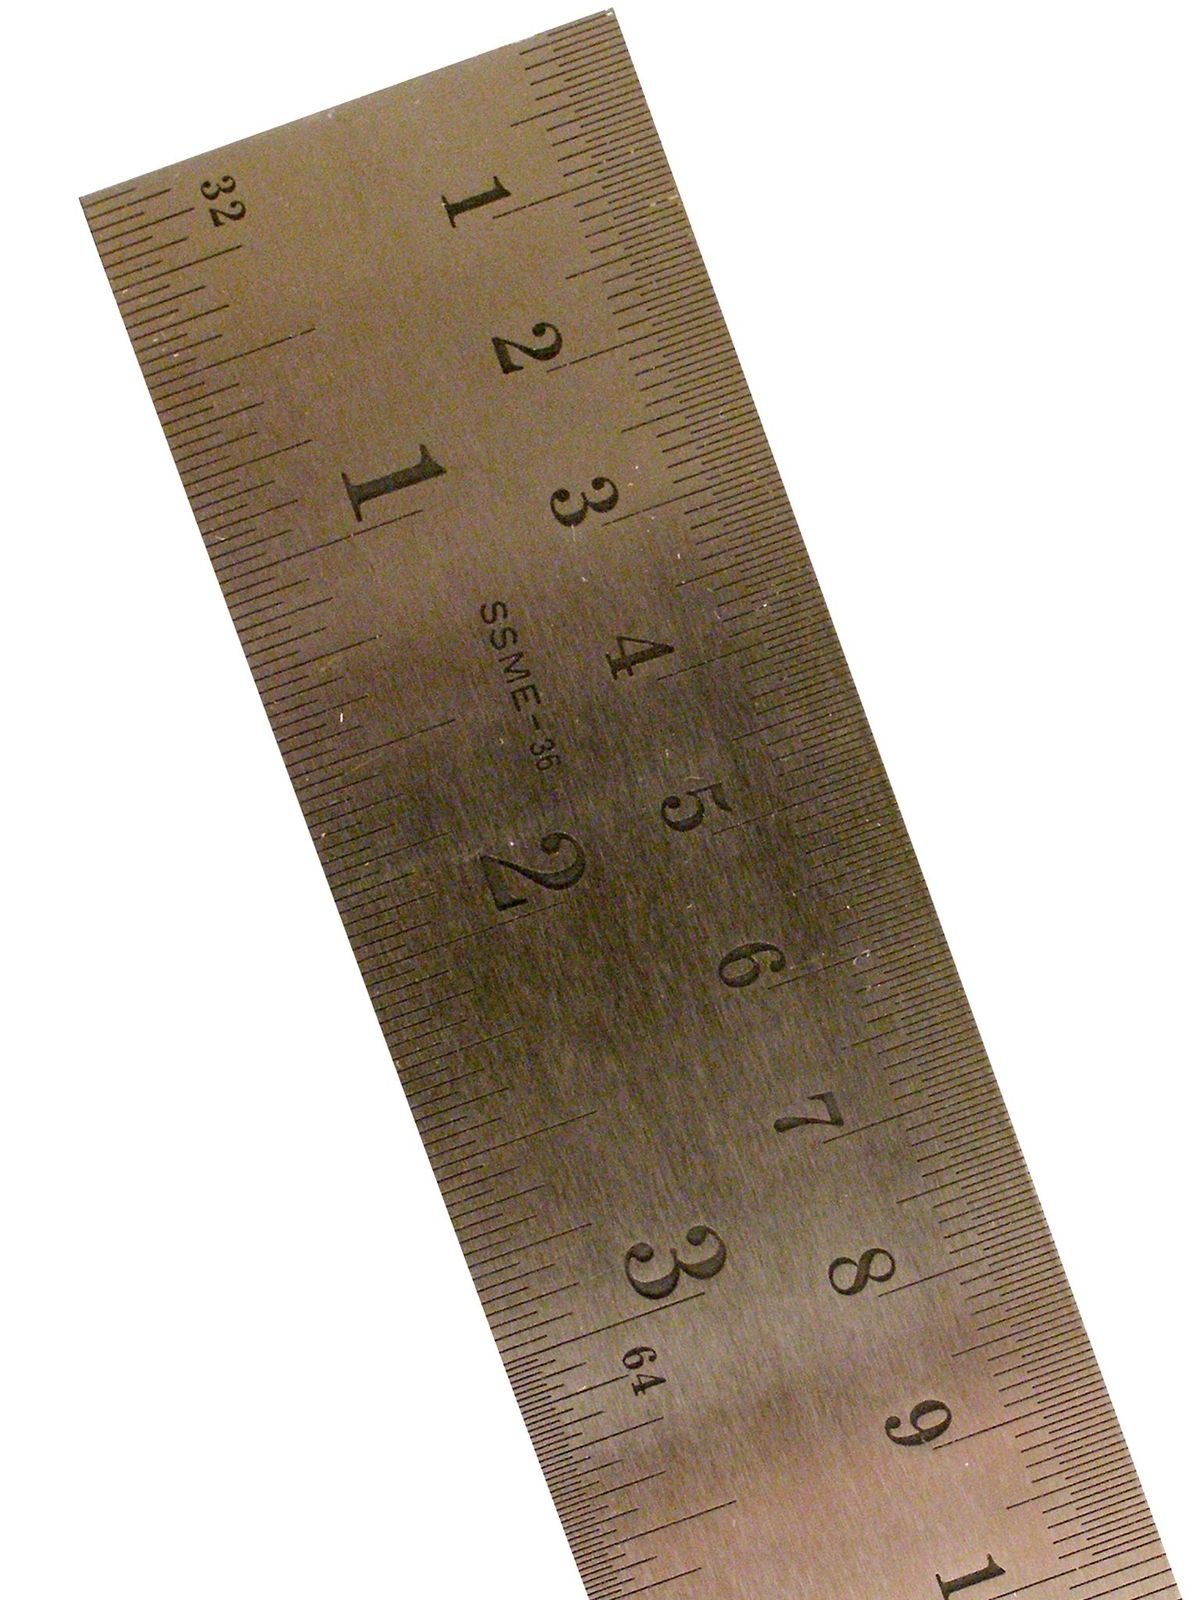 PACIFIC ARC Stainless Steel Rulers Inch/Metric with Conversion Table